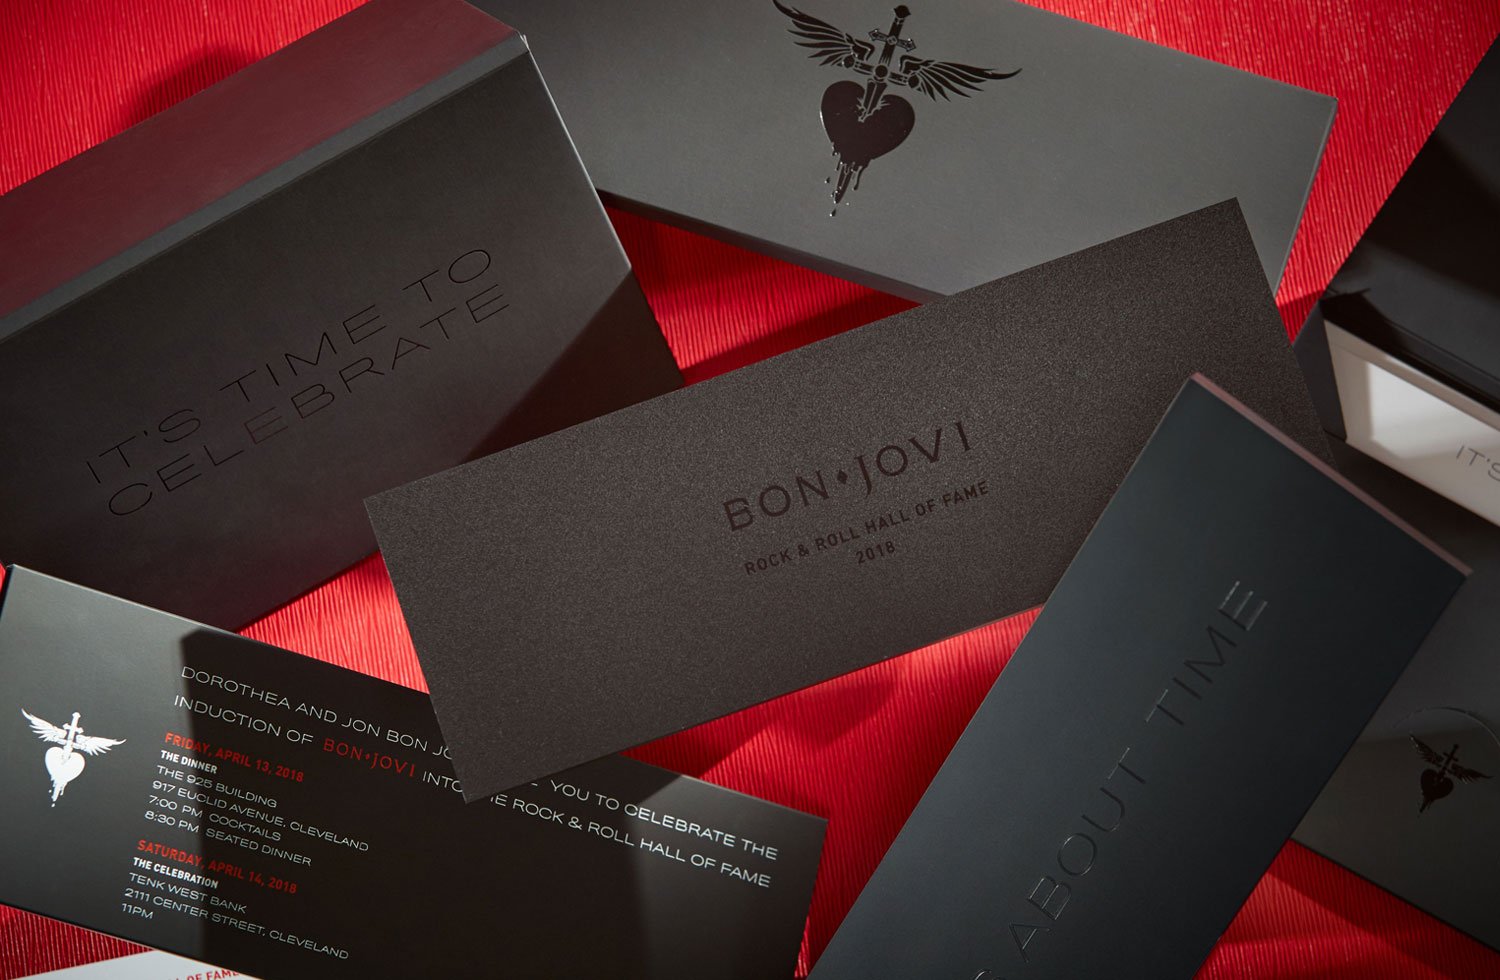  Event Brand Concept, Invitation, Event Accessories for Jon Bon Jovi celebrating his Rock and Roll Hall of Fame induction. 